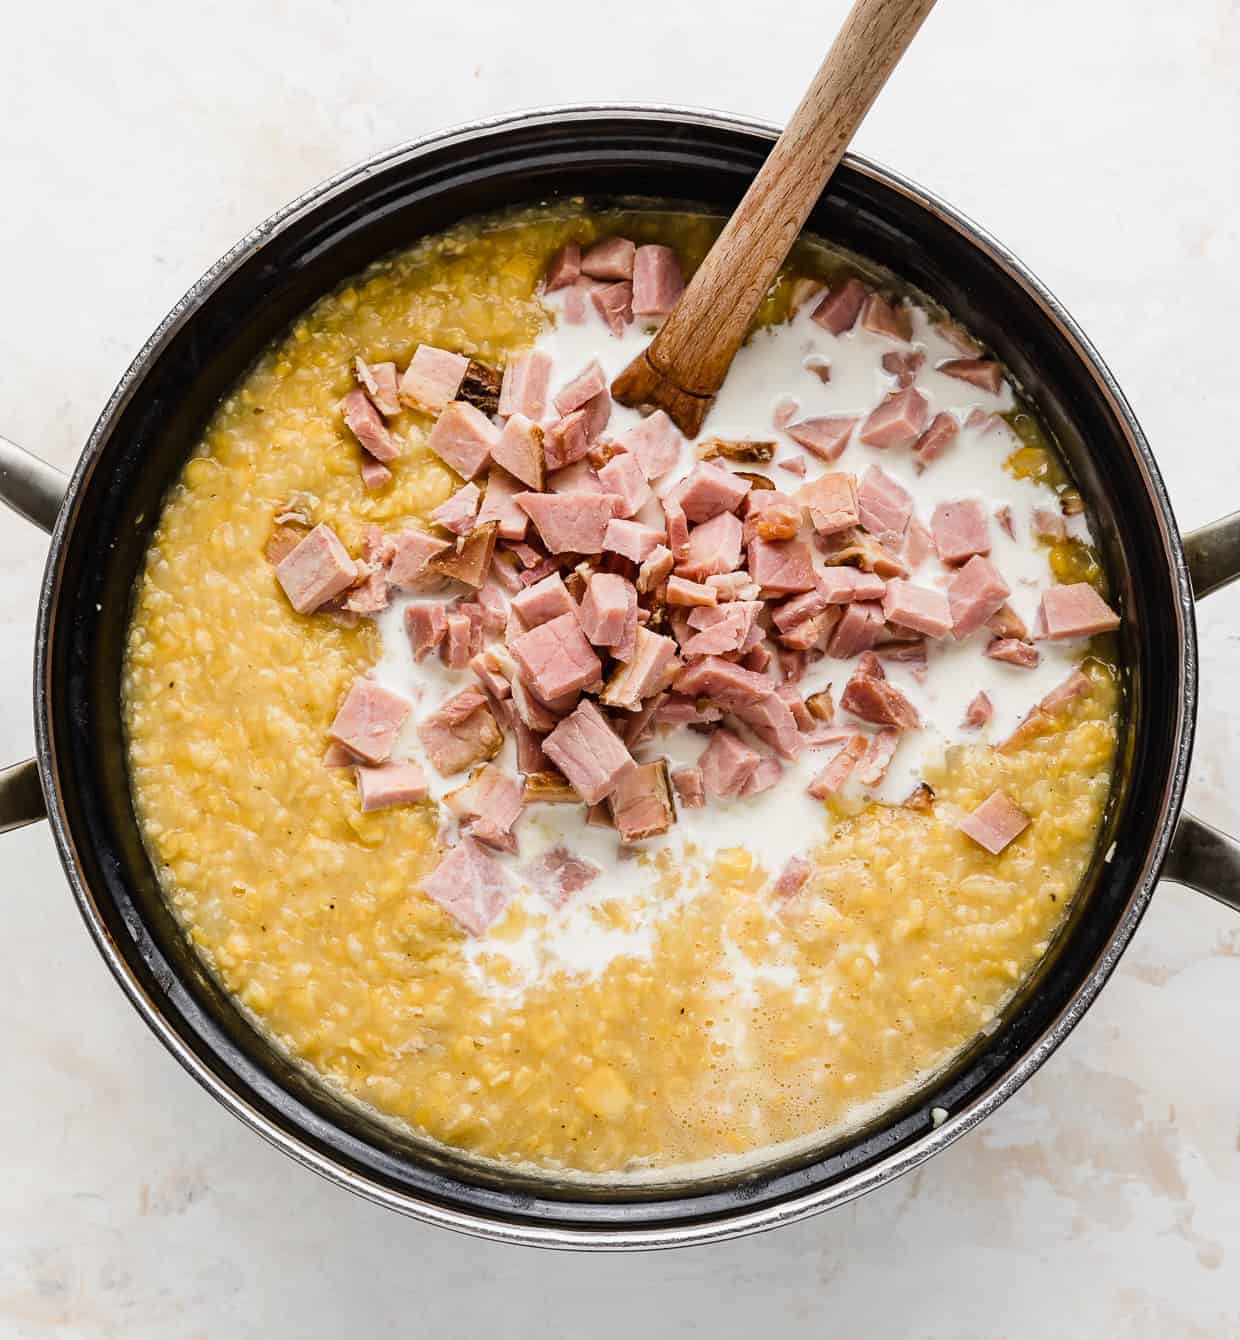 A large pot full of corn chowder, with diced ham and heavy cream placed overtop of the chowder.